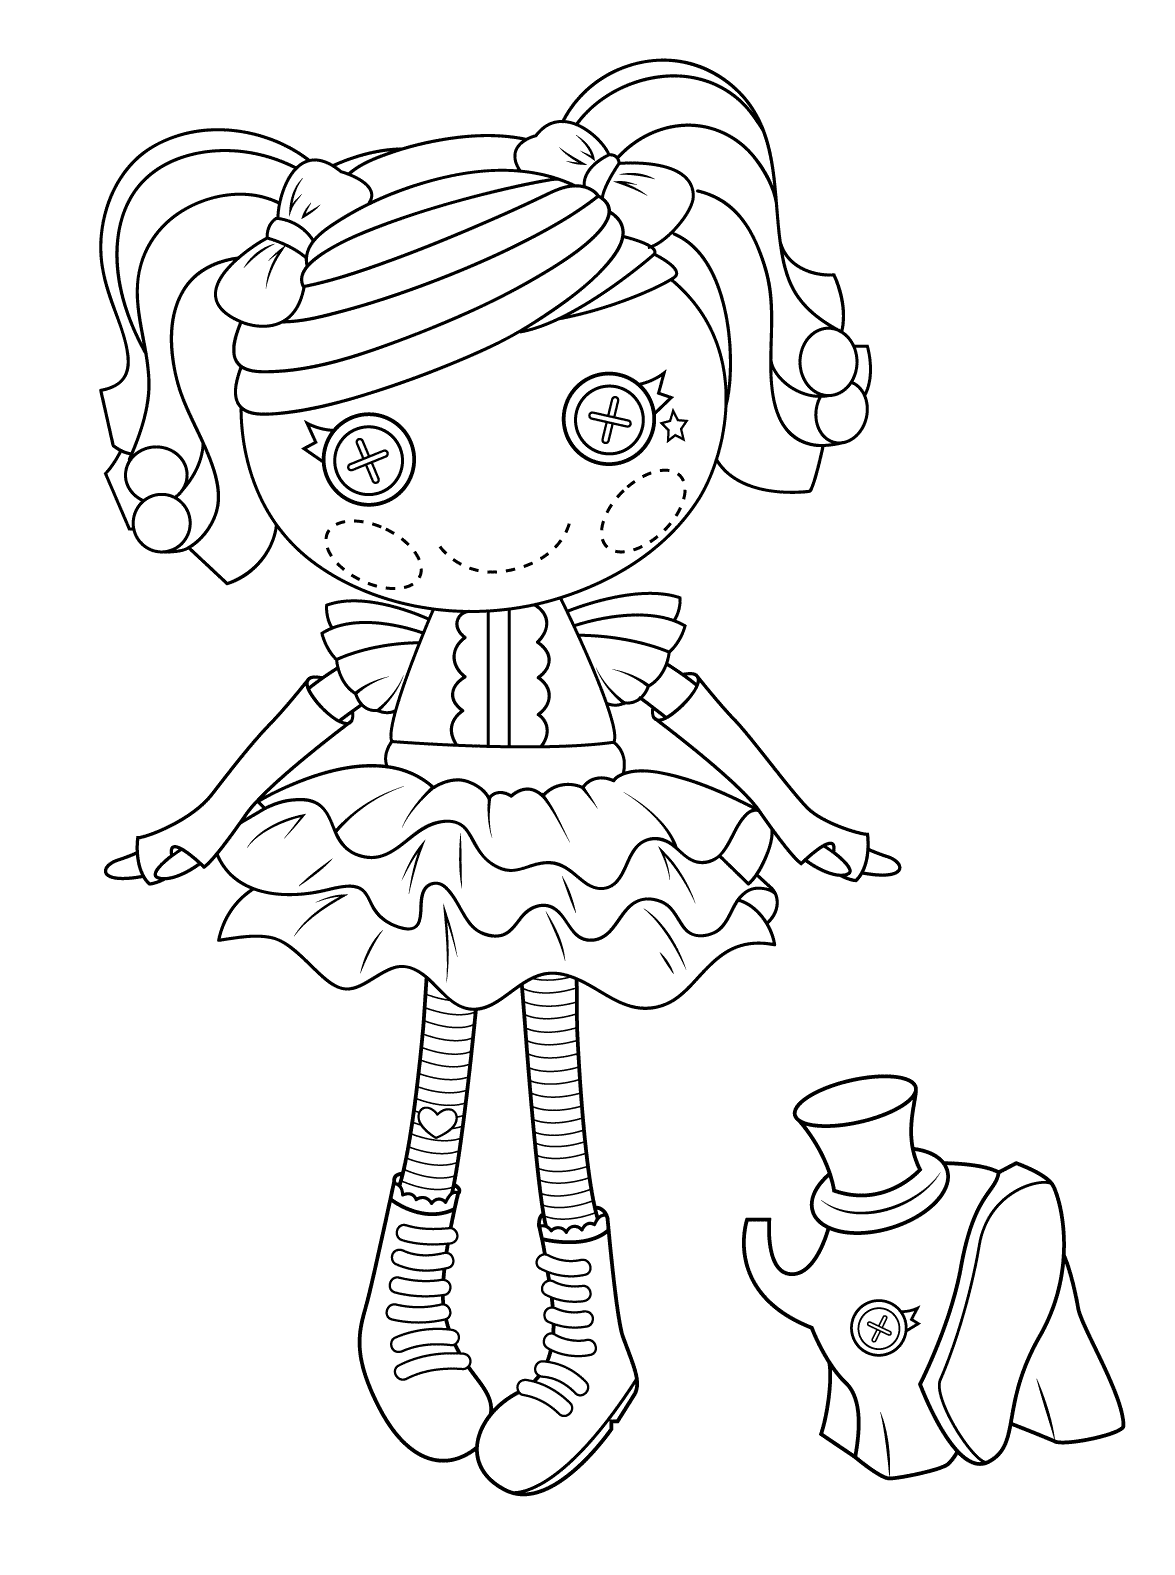 Doll Coloring Pages - Best Coloring Pages For Kids